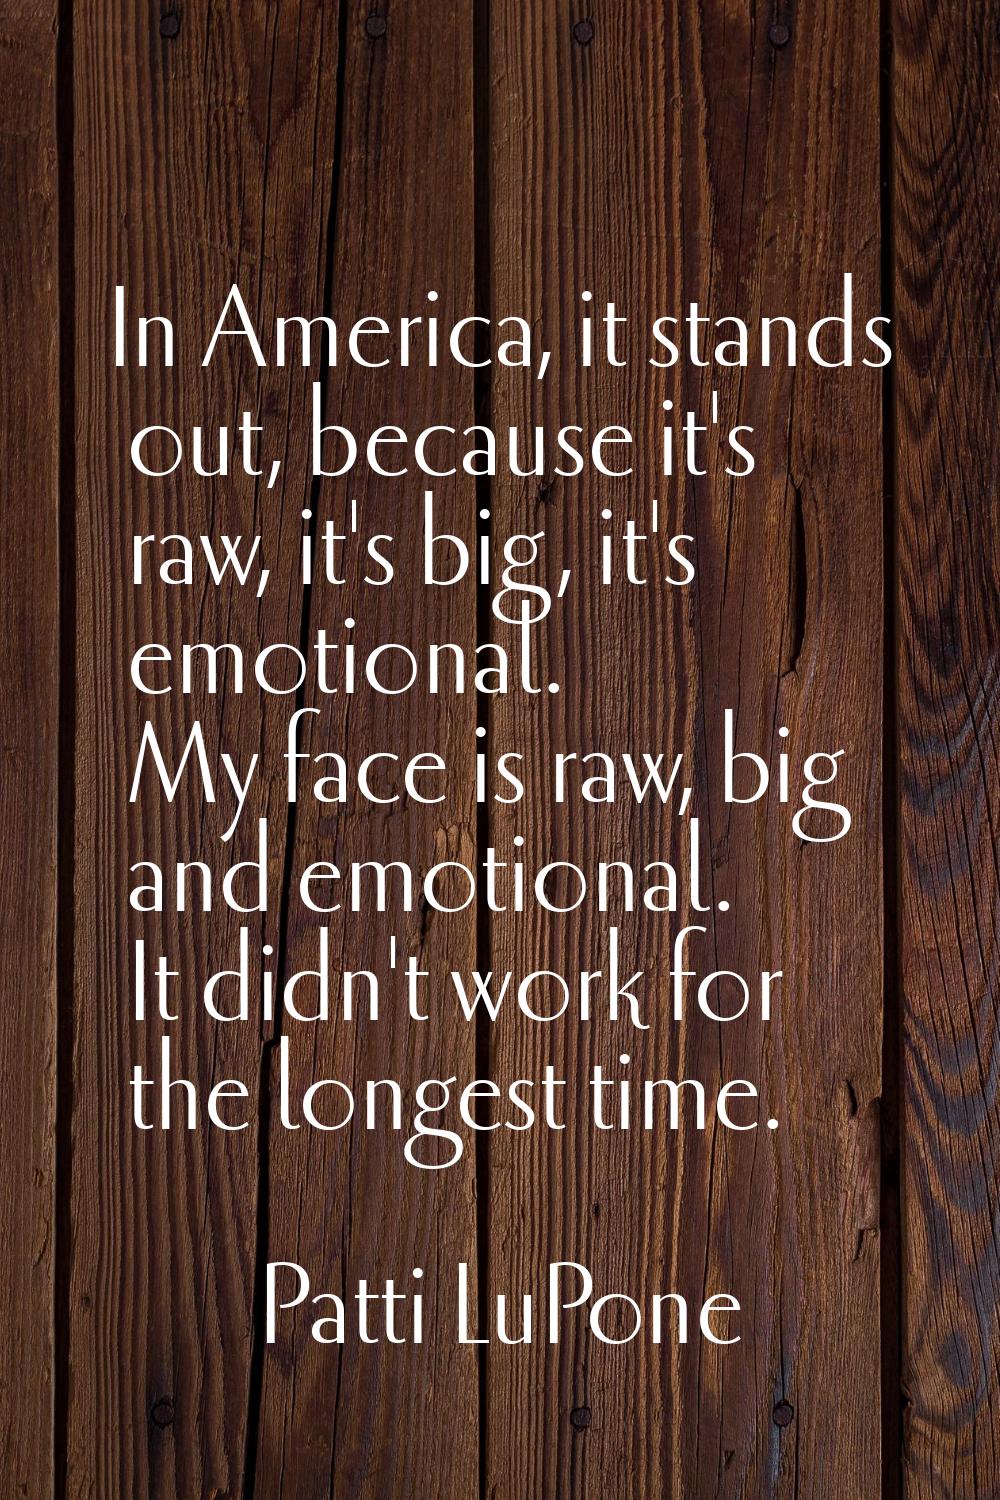 In America, it stands out, because it's raw, it's big, it's emotional. My face is raw, big and emot